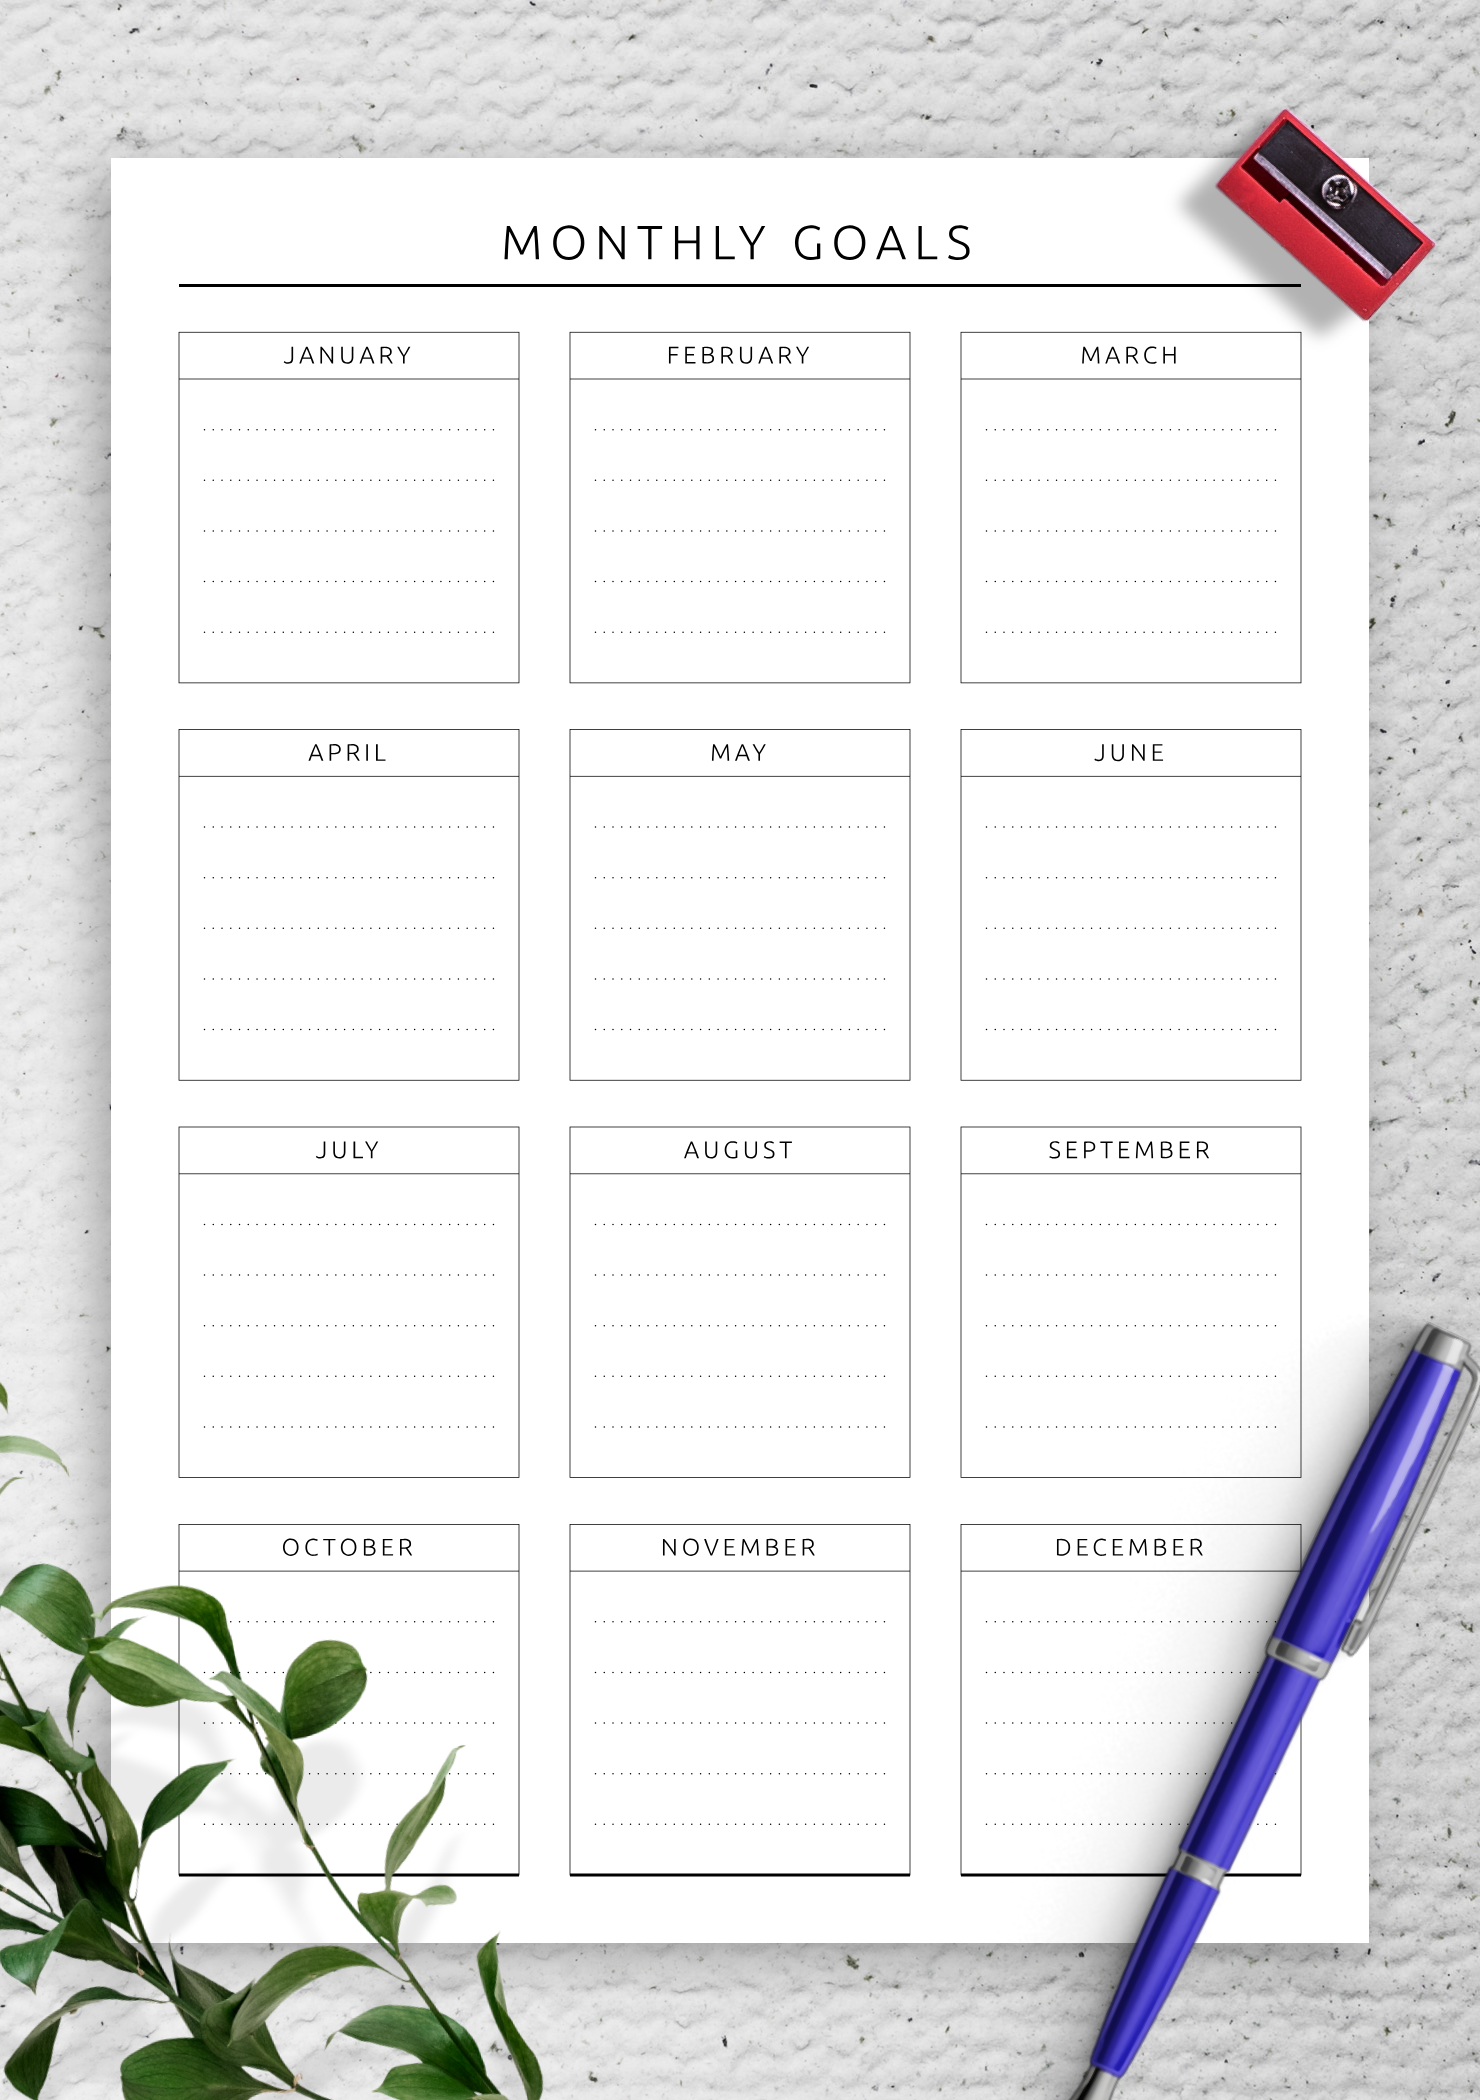 free-printable-goal-setting-templates-to-help-you-succeed-made-simple